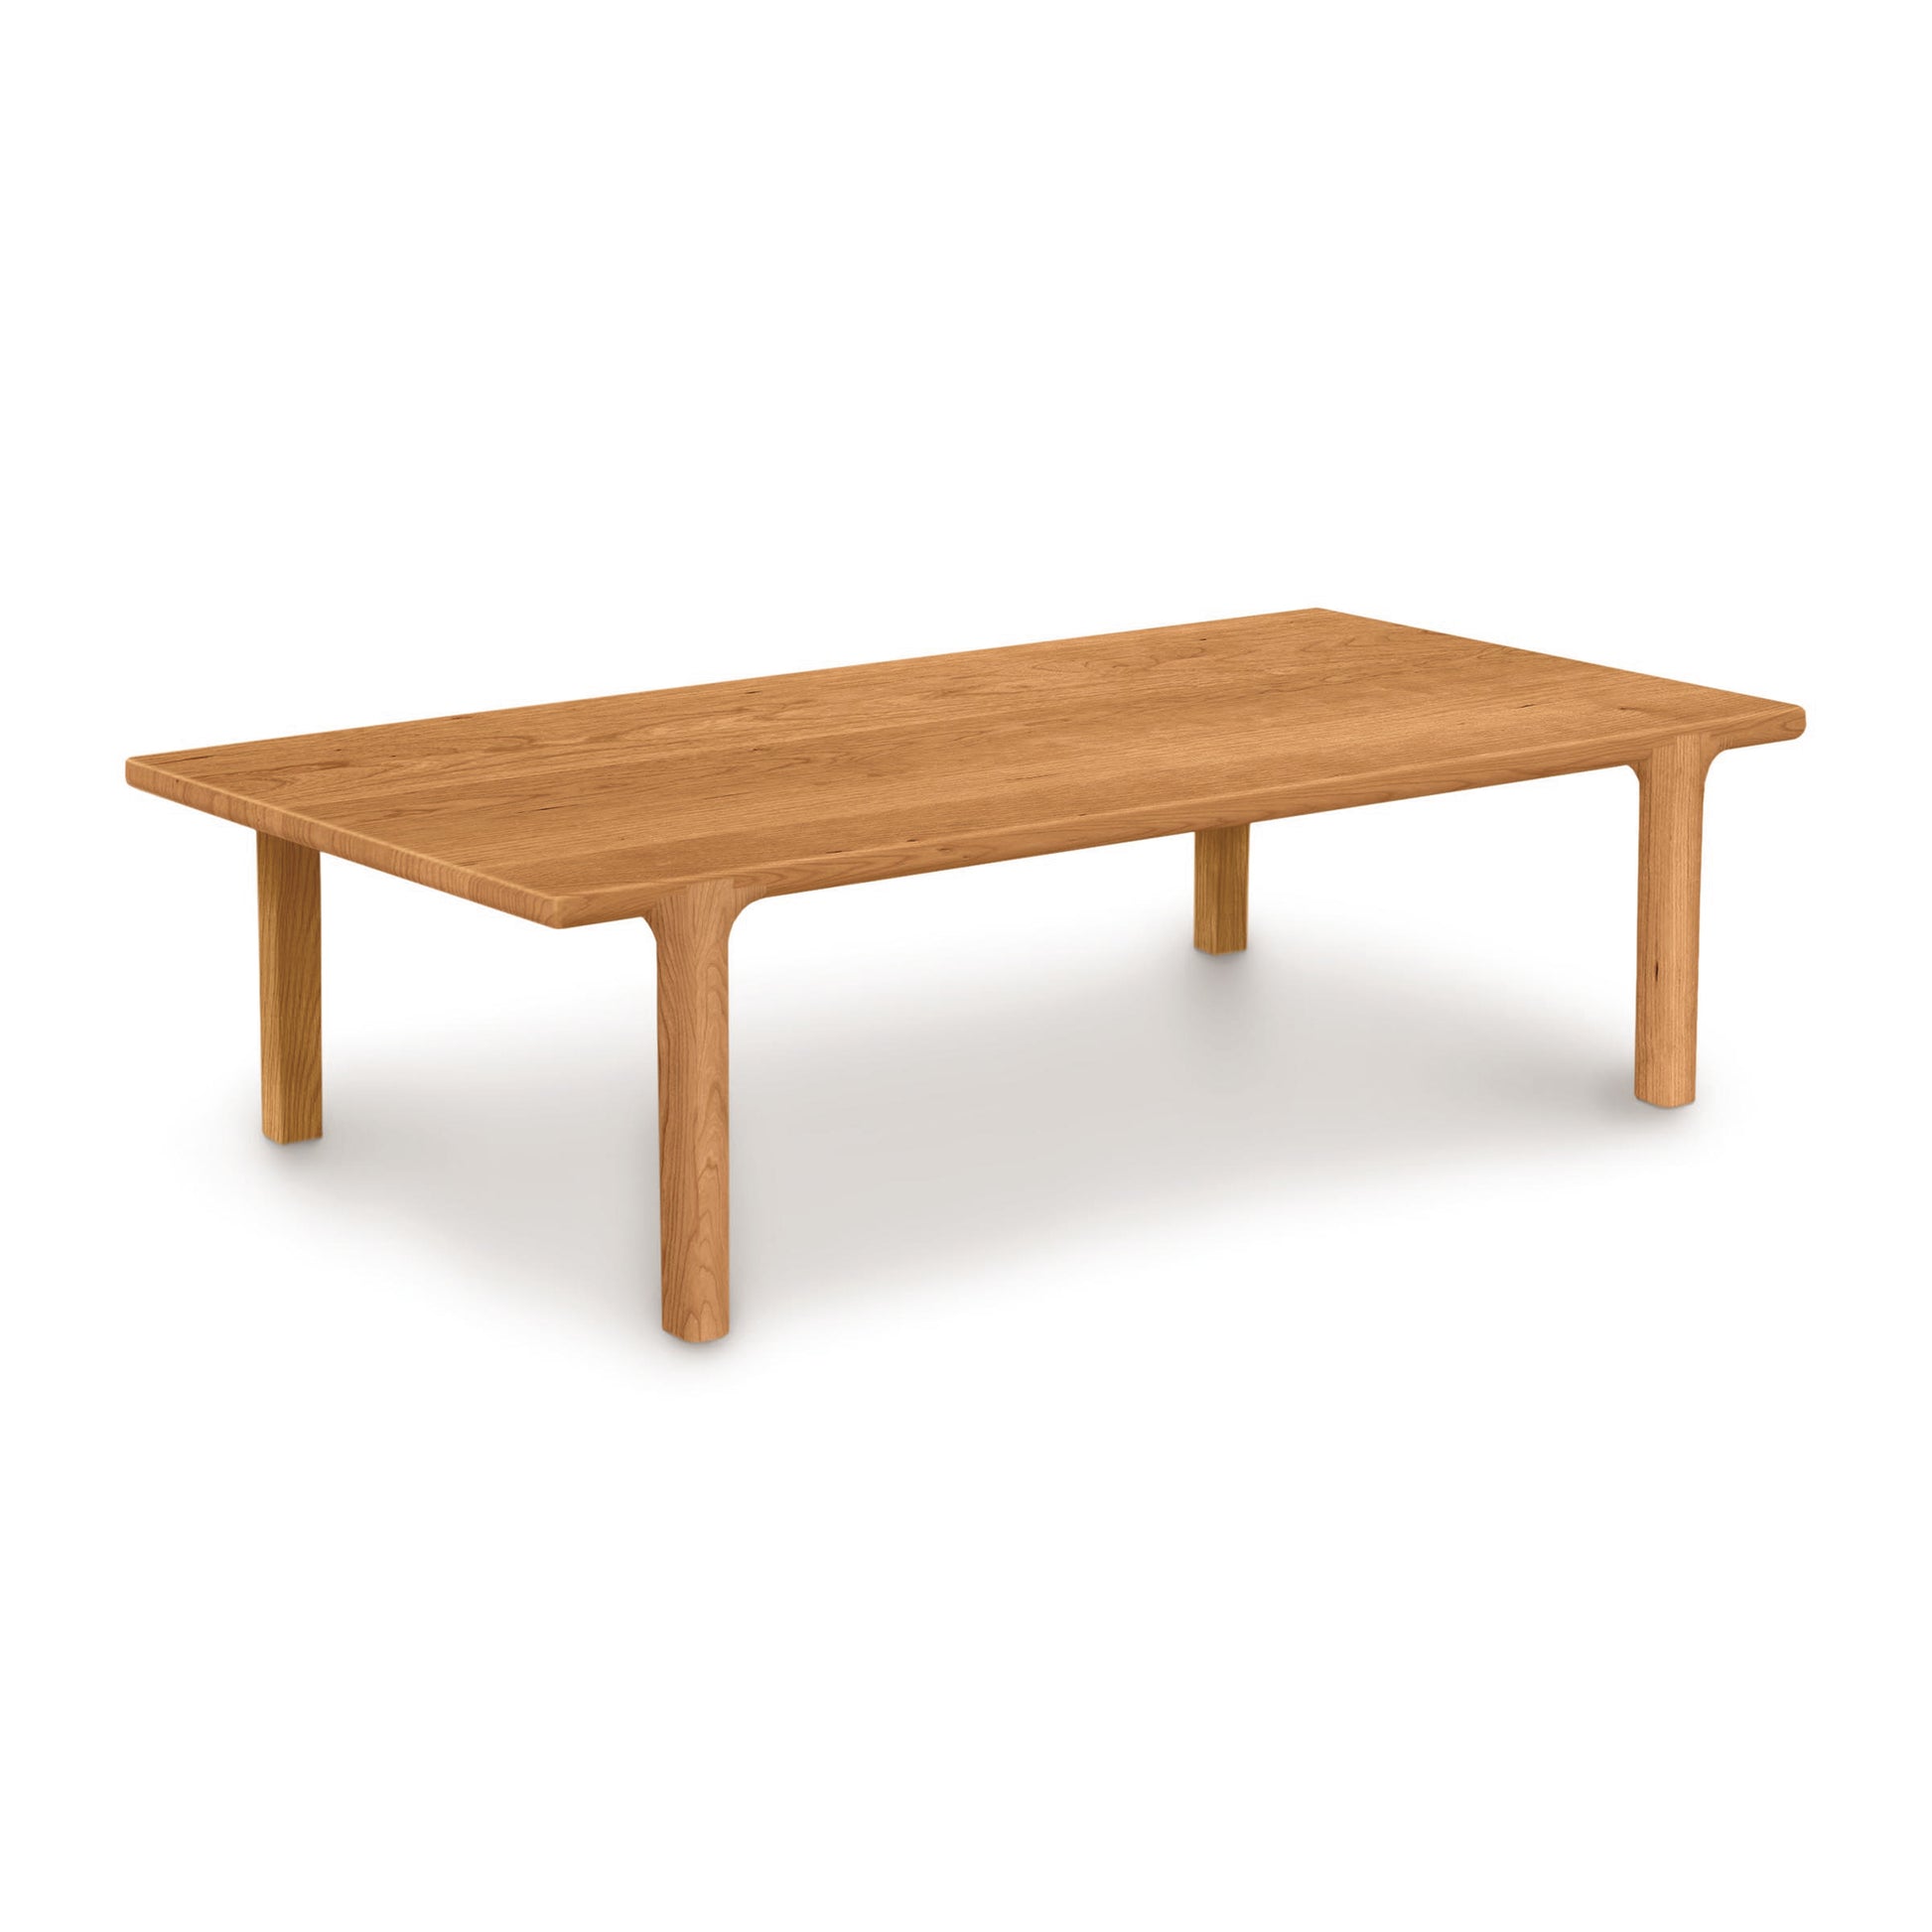 A simple Copeland Furniture Sierra Rectangular Coffee Table made of solid North American hardwood with four round legs on a white background.